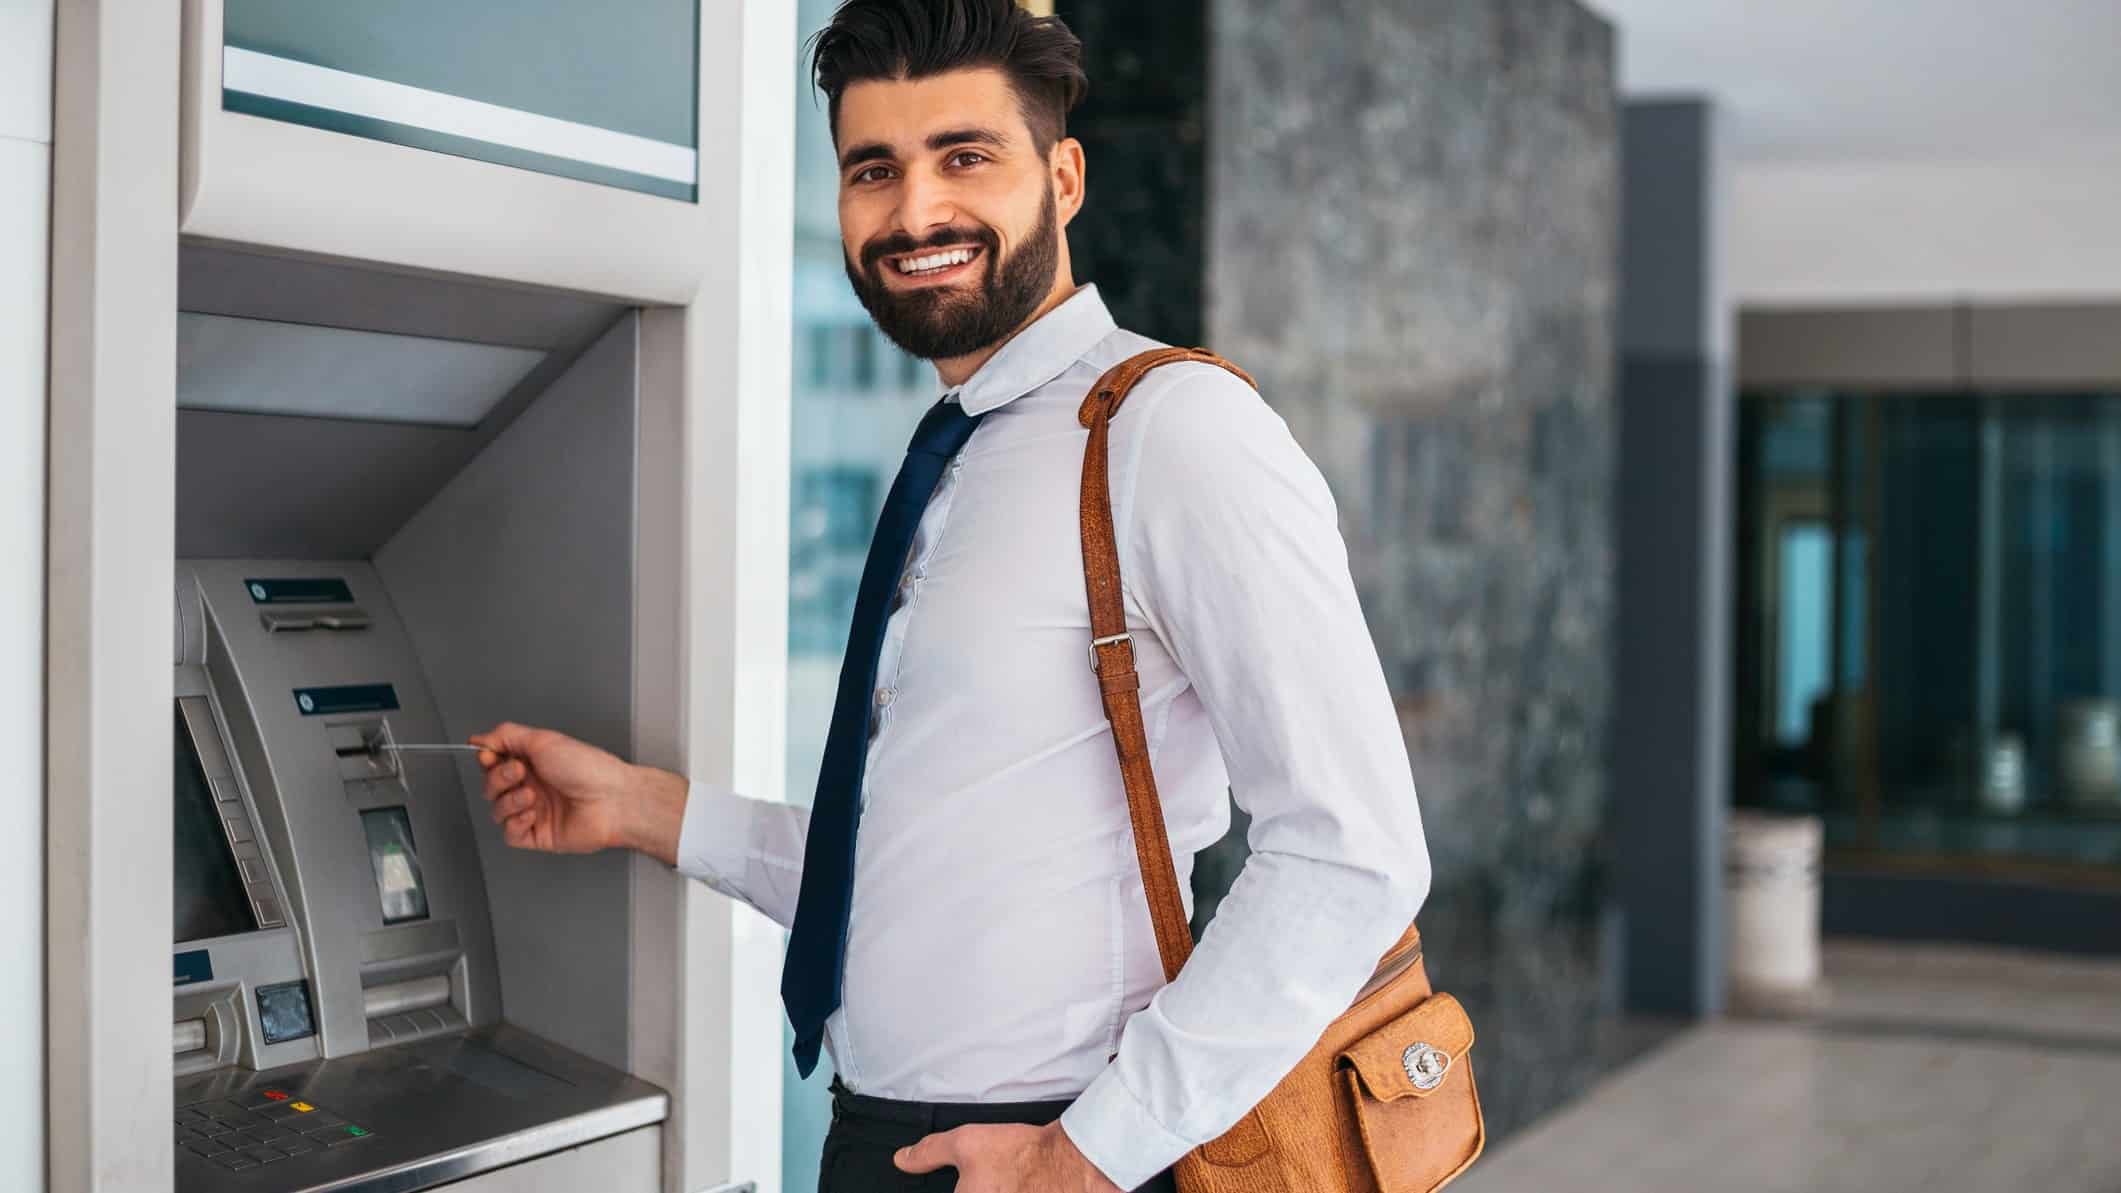 Happy man at an ATM.